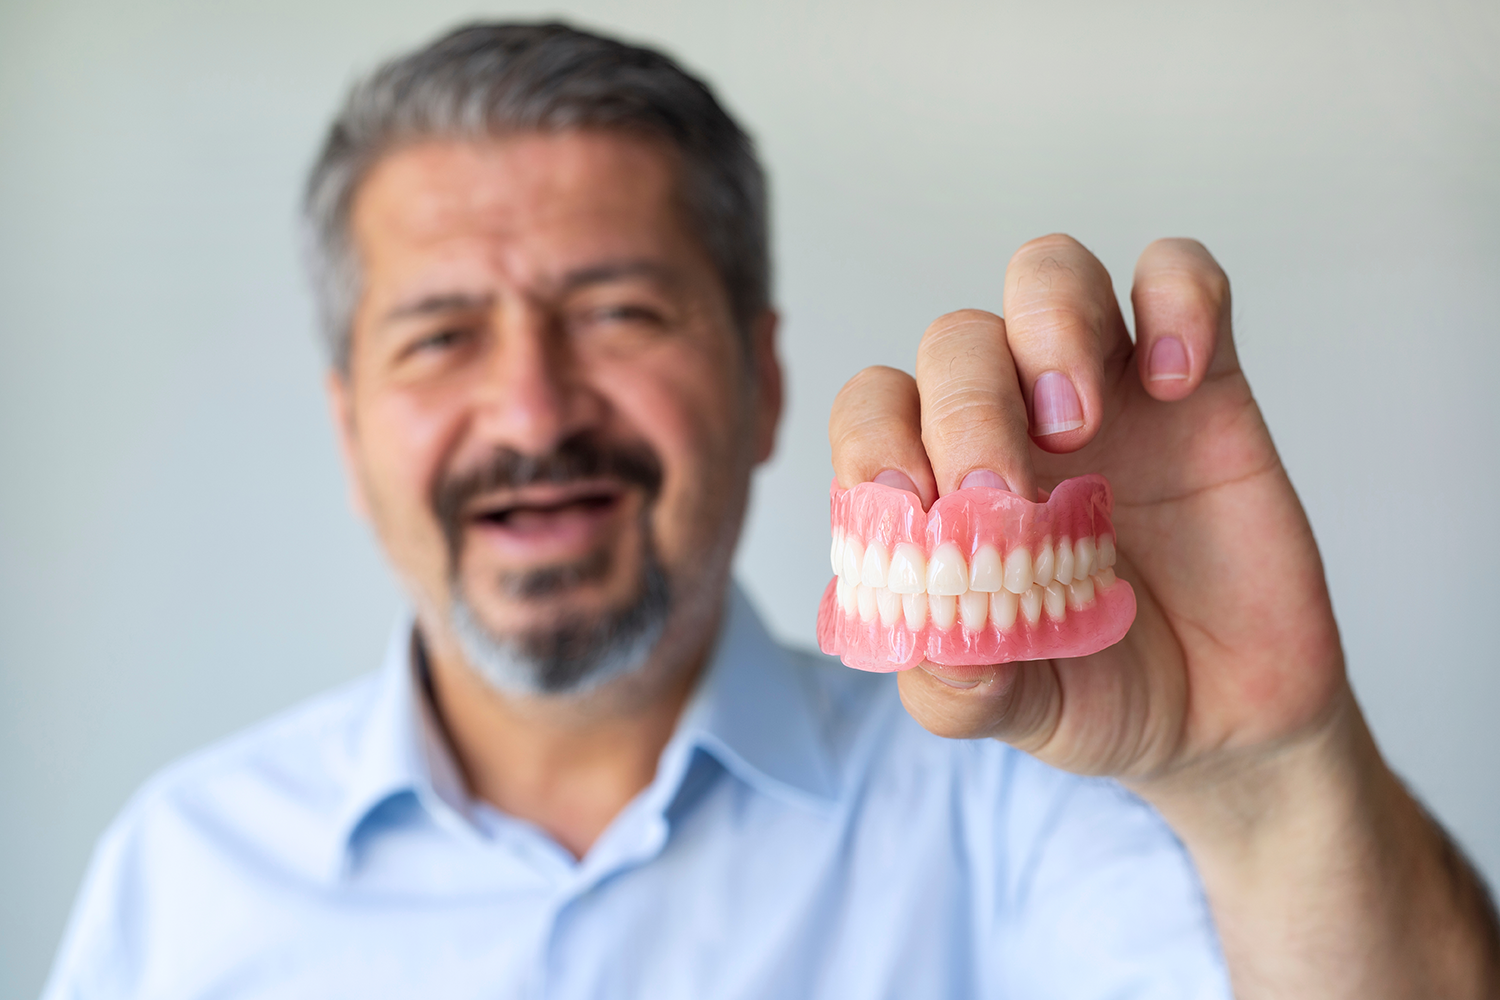 Showing a set of conventional dentures